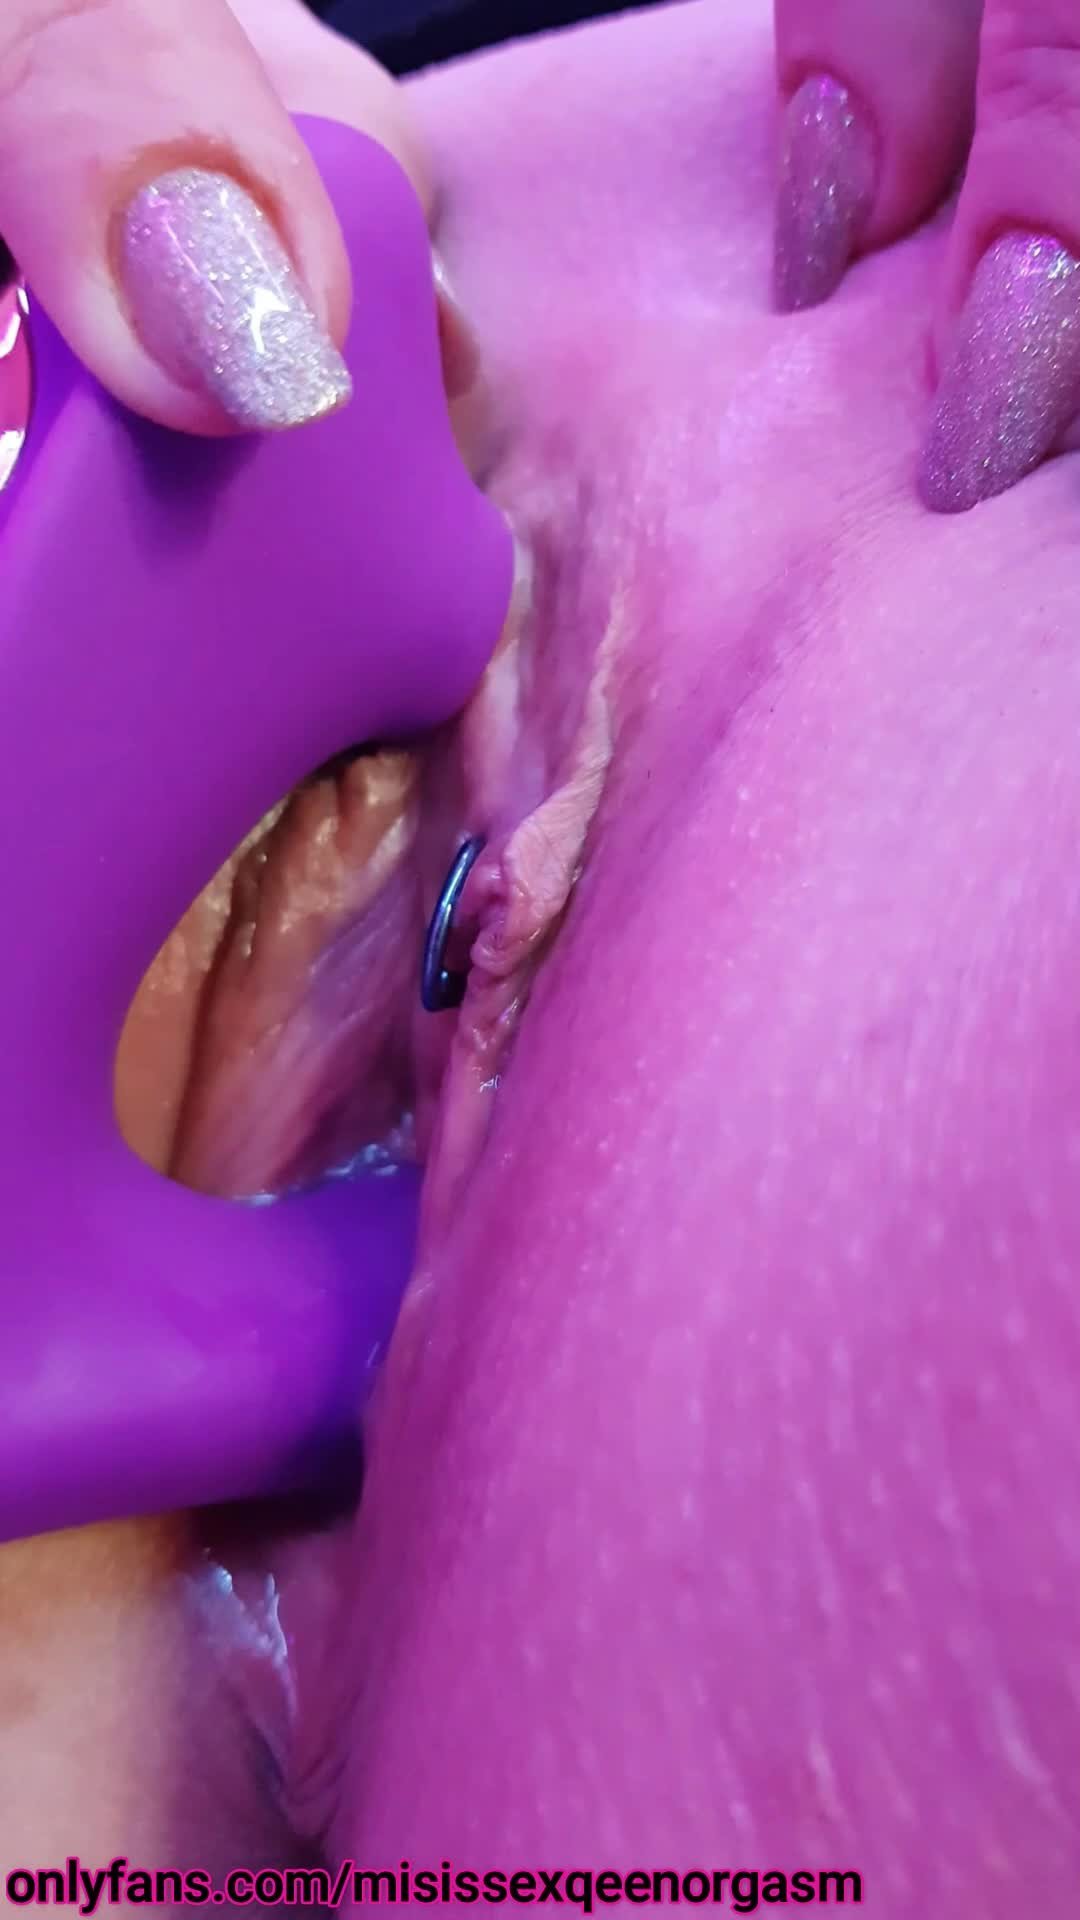 Video by AngelCummings with the username @AngelCummings, who is a star user,  January 30, 2022 at 8:50 AM. The post is about the topic premnudes.com and the text says 'Vacuum vibrator brings my pussy to multi-orgasmic ecstasy https://rt.pornhub.com/view_video.php?viewkey=ph61ea7d8f4d2be'